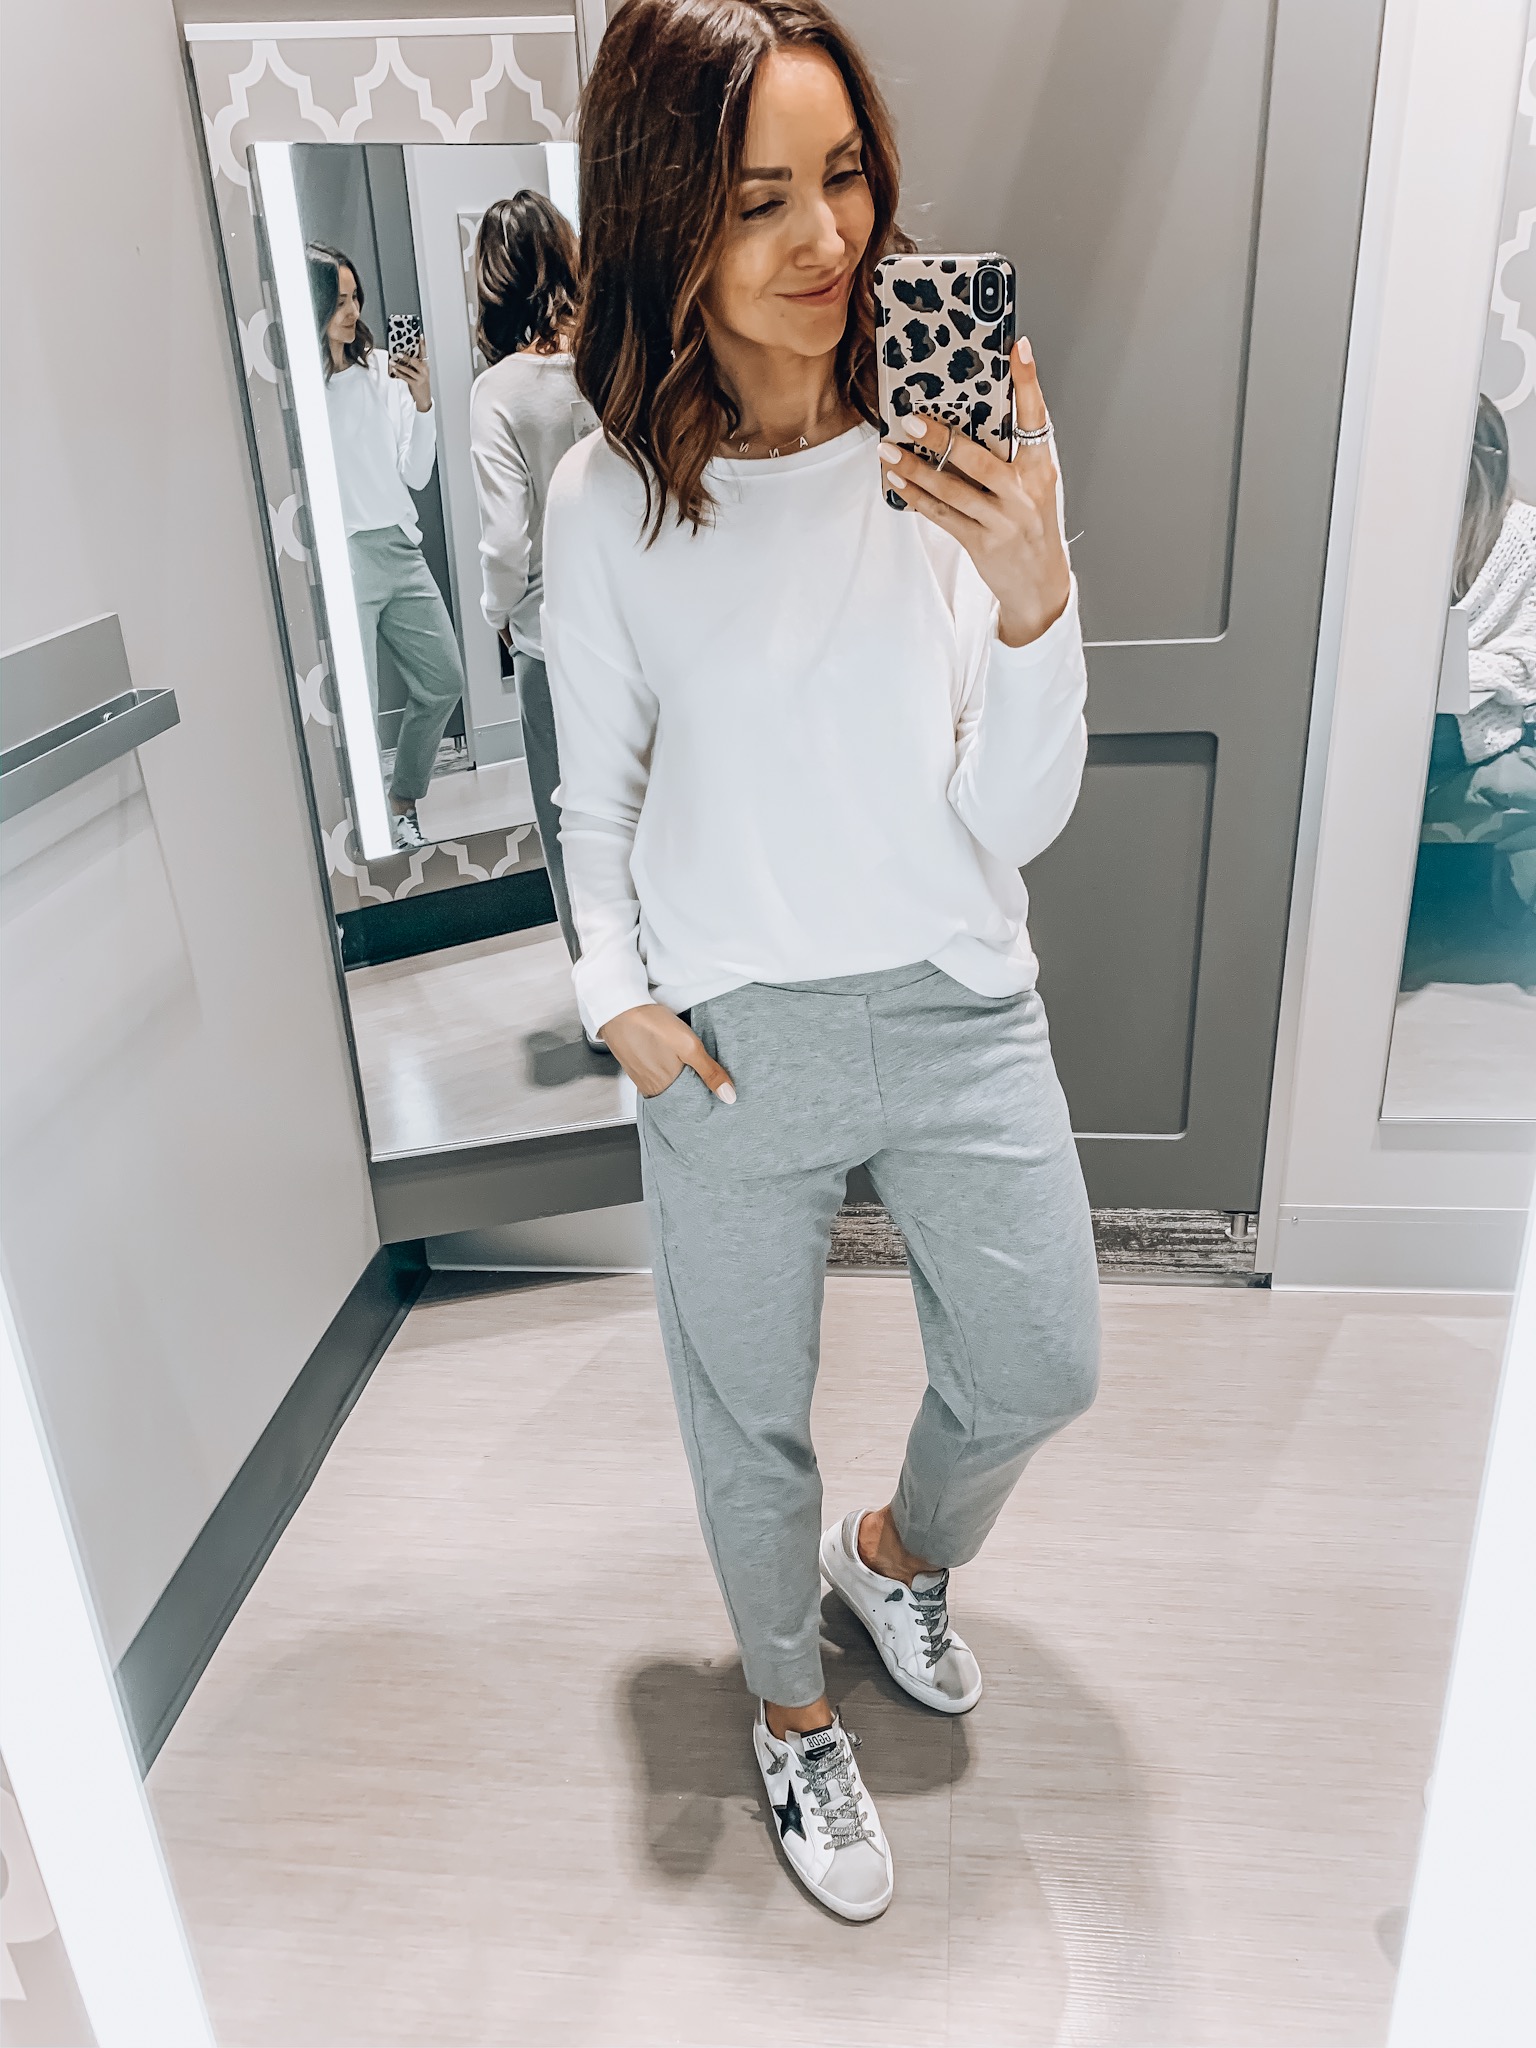 woman wearing casual wear, long tee and joggers